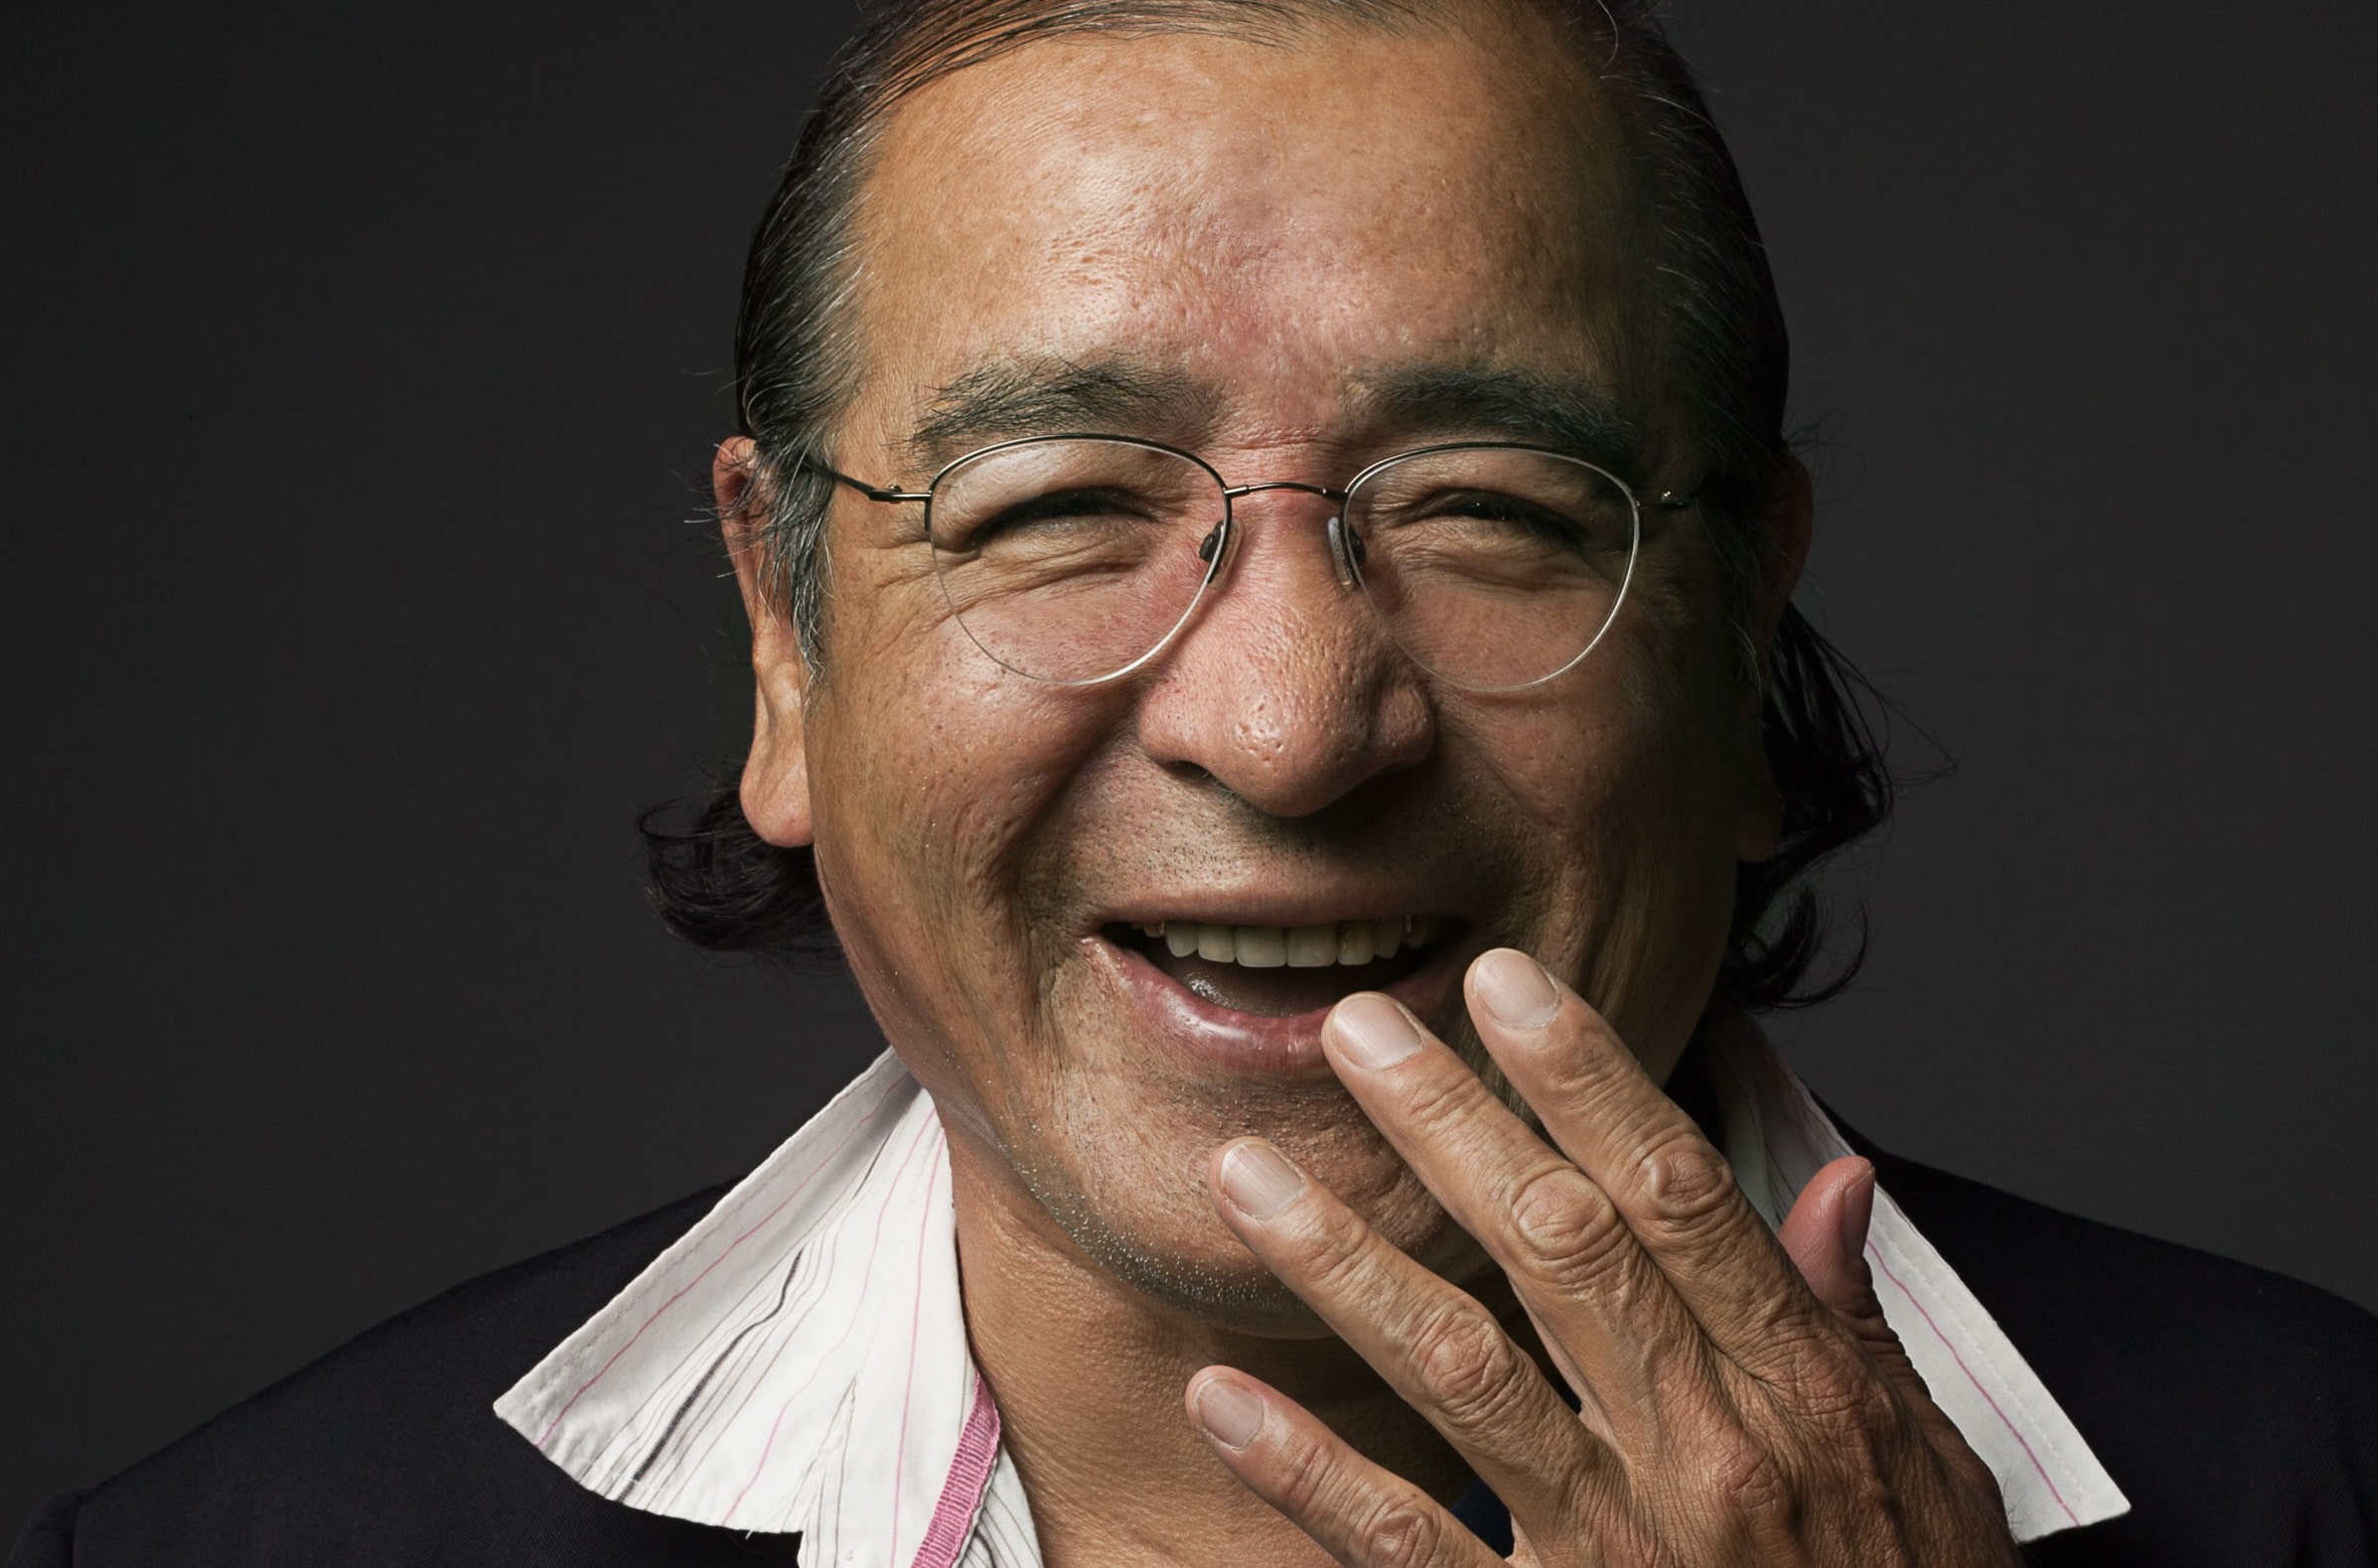 Writer Tomson Highway laughs with his hand almost cover his mouth.